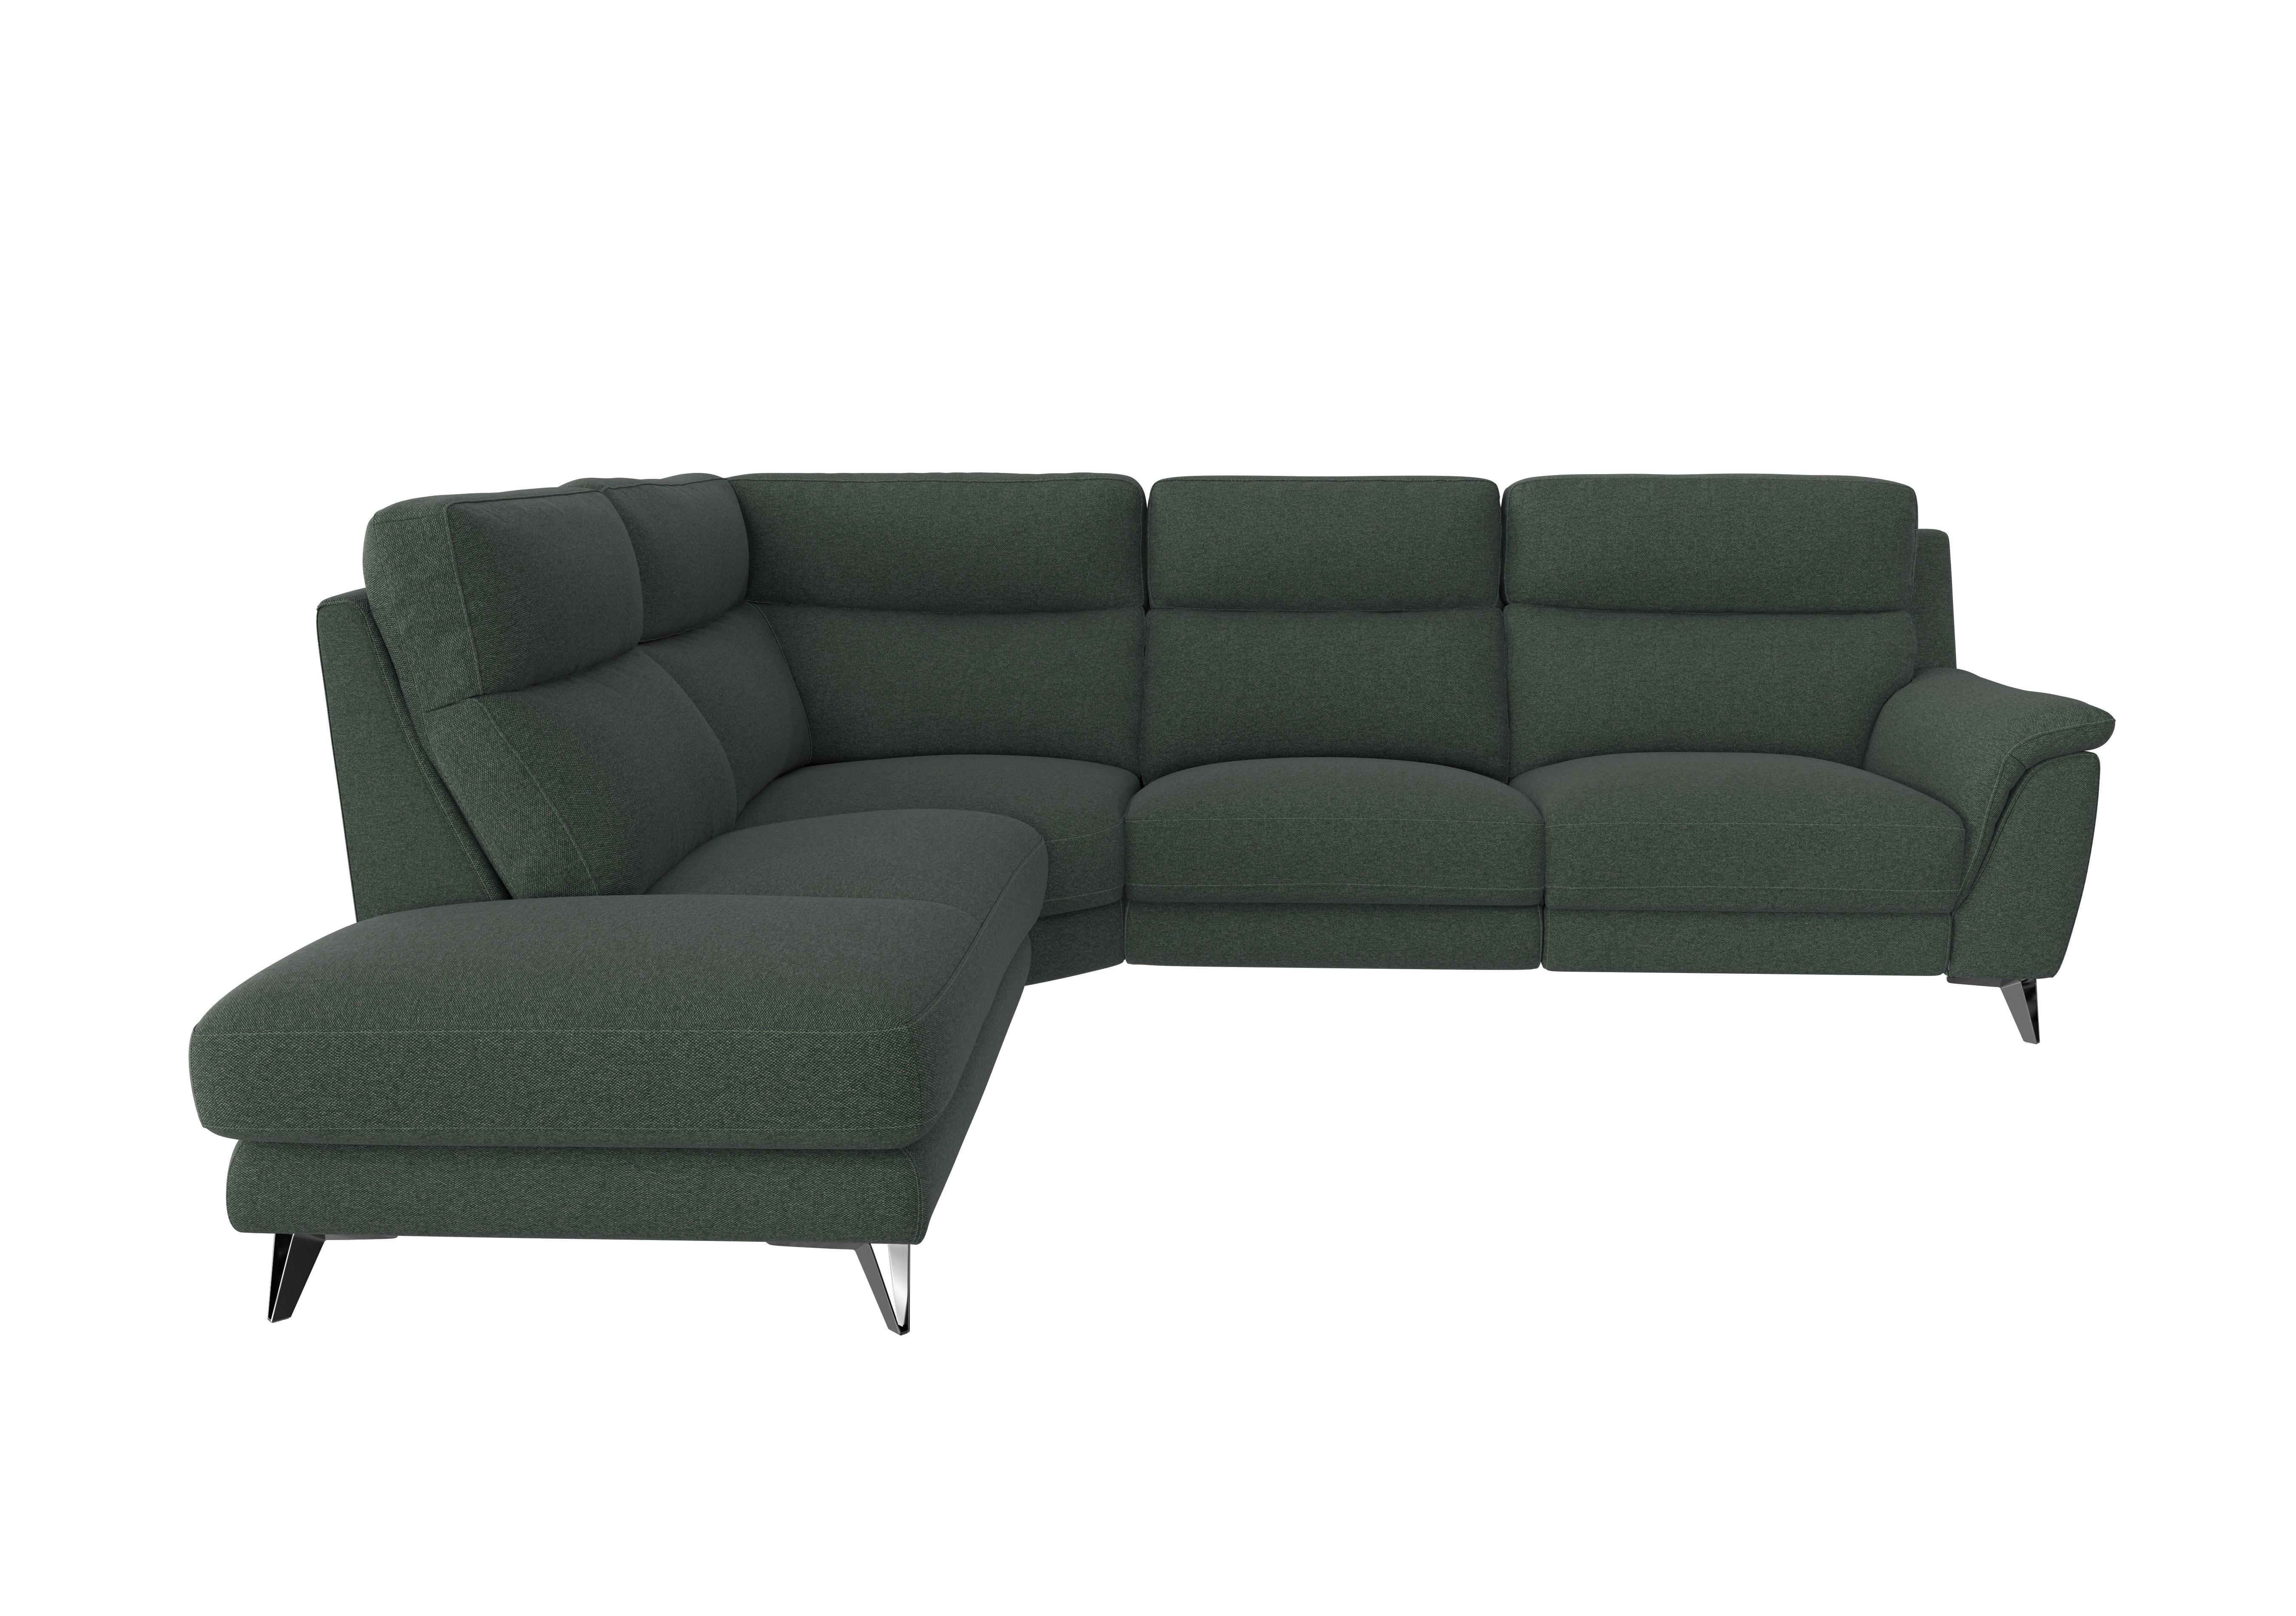 Contempo 3 Seater Chaise End Fabric Sofa in Fab-Ska-R48 Moss Green on Furniture Village